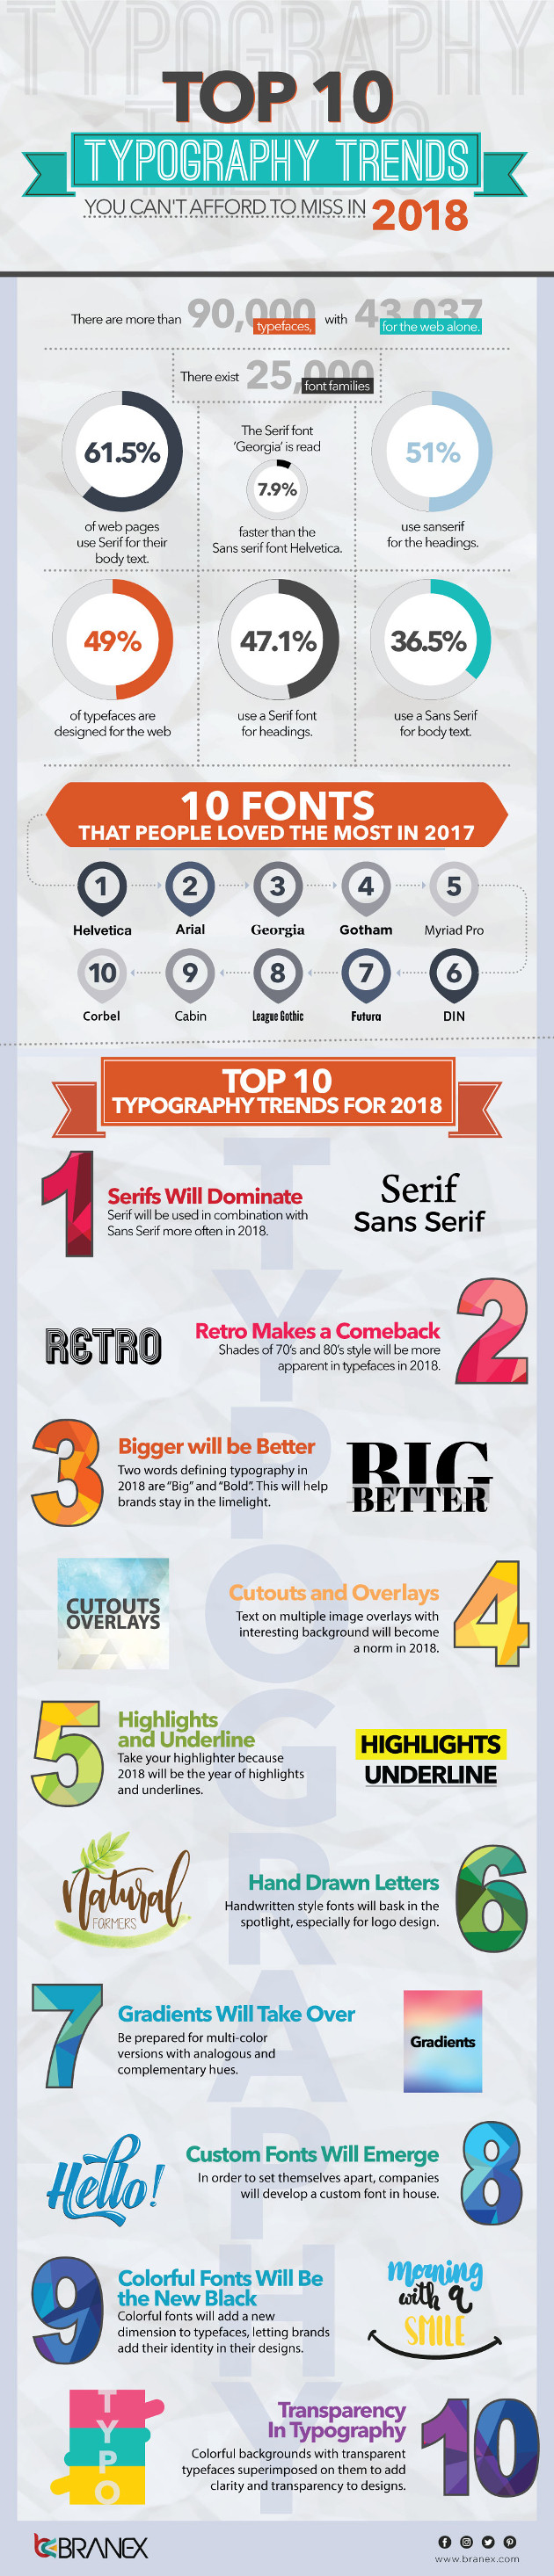 Top 10 Typography Trends of 2018 [Infographic]